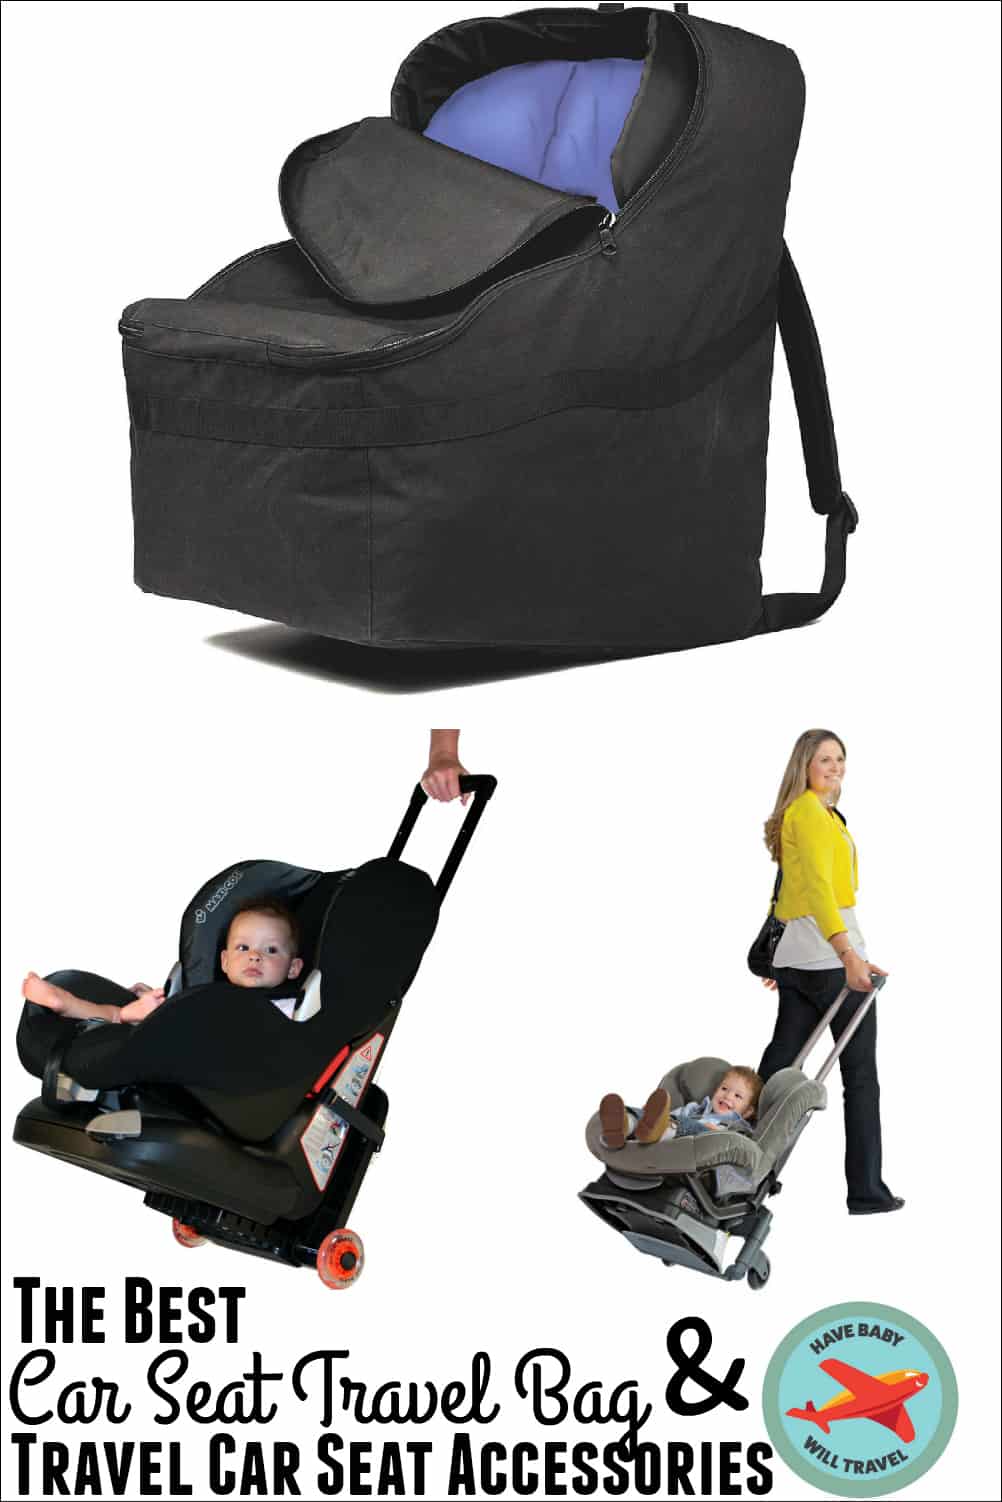 DELUXE Booster Go-Go Travel Bag for Booster Seats – jlchildress